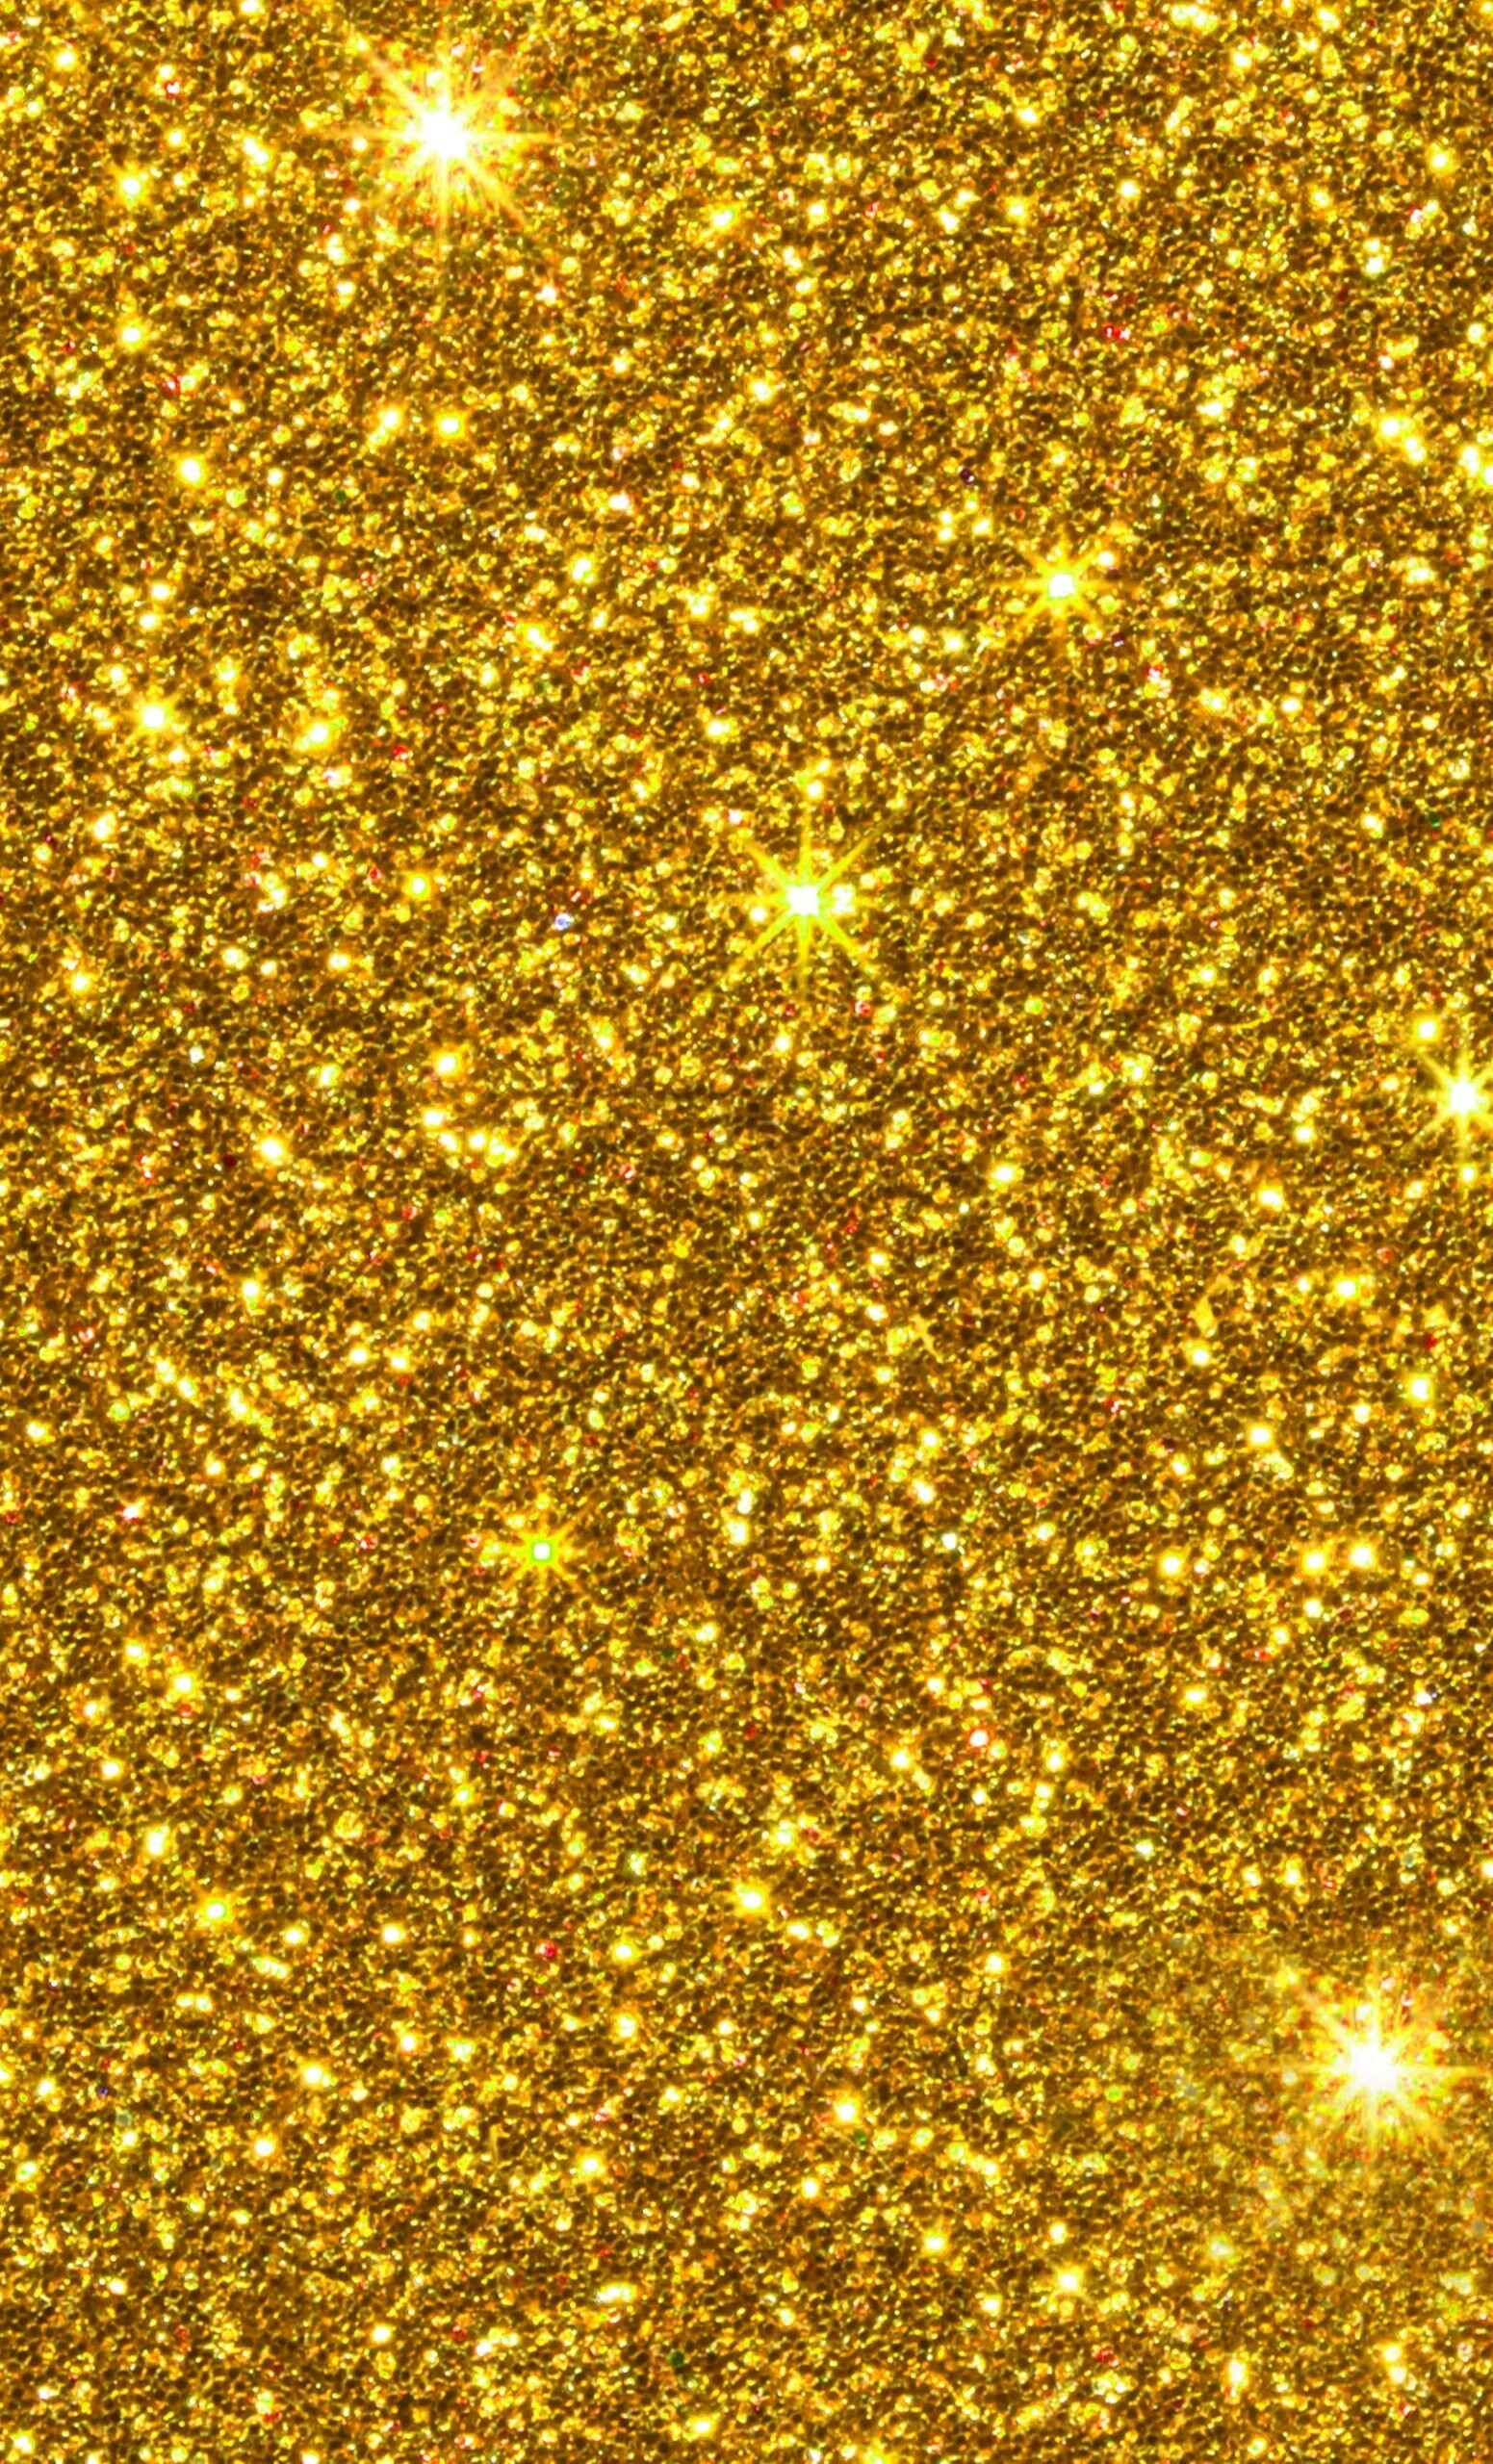 Gold Sparkle: Sequins, Golden shining texture, Multi-layered reflective sheets cut into small particles of various shapes. 1560x2560 HD Wallpaper.